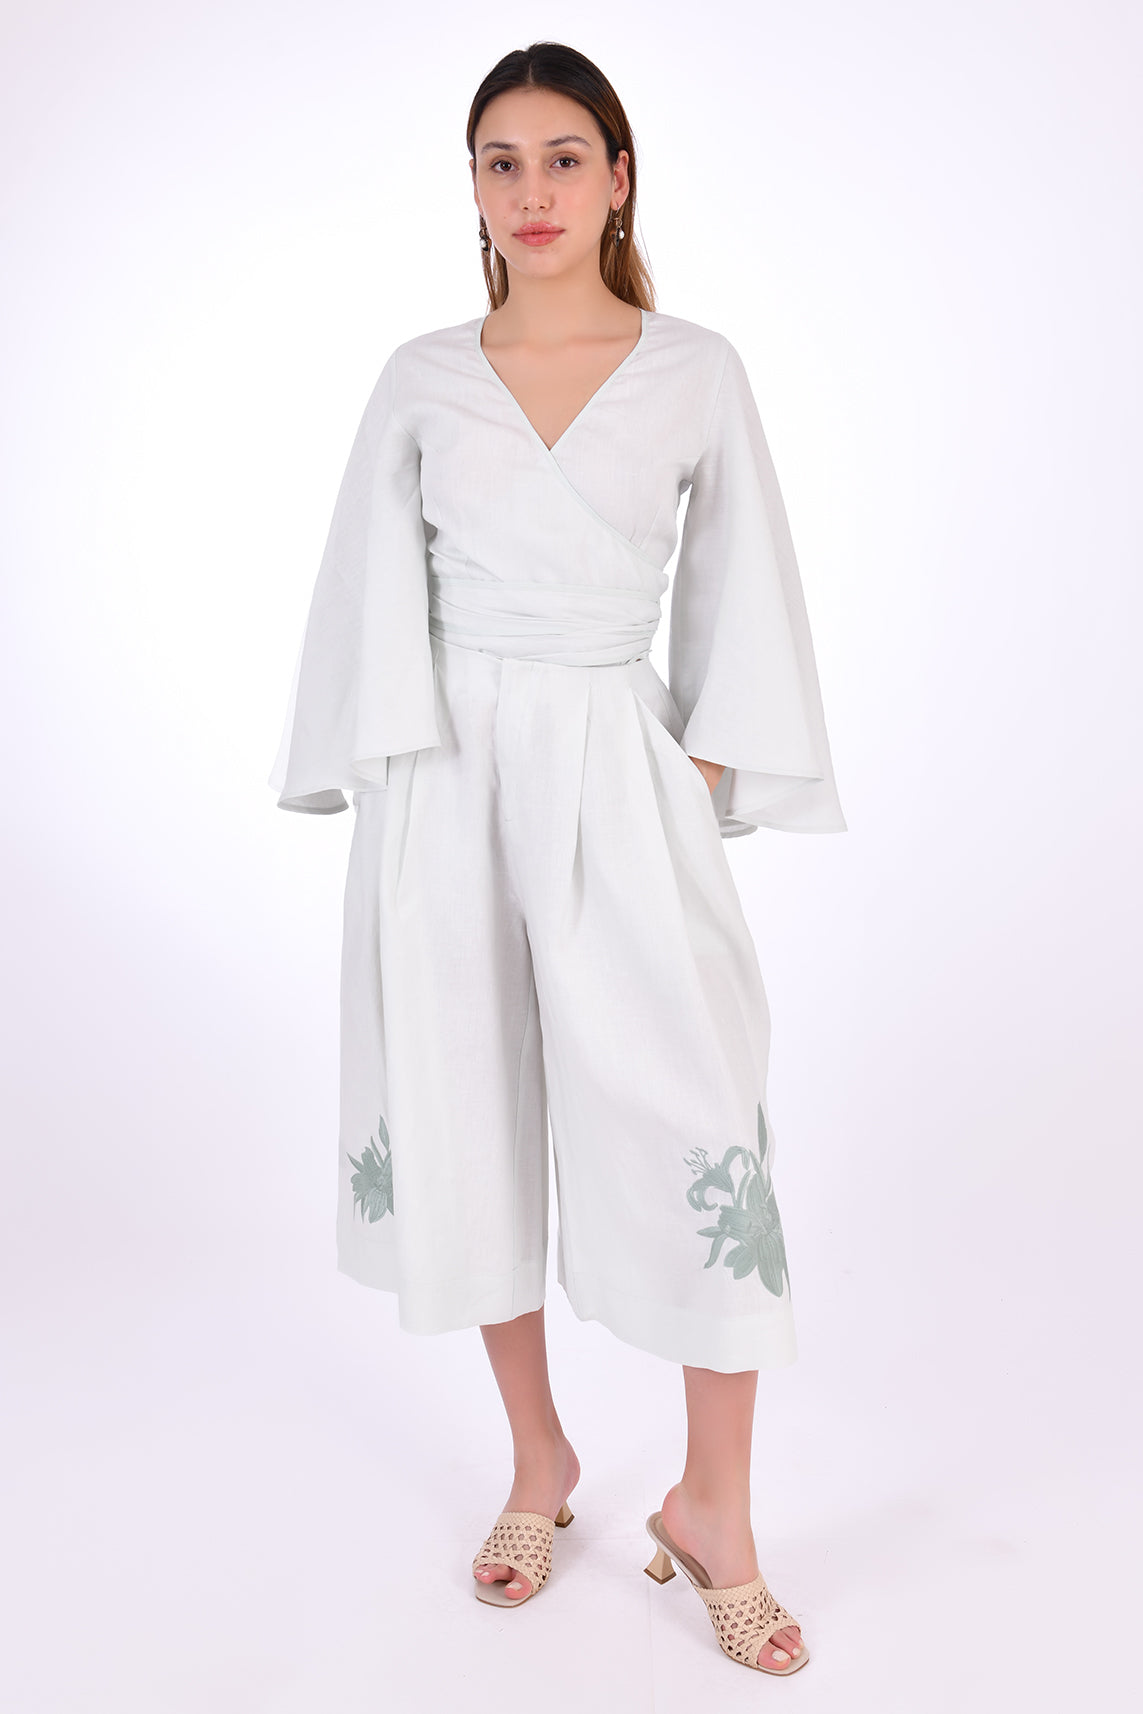 Fanm Mon Des-Vu Linen Shorts Set (Front View). 2-Piece Linen Shorts &amp; Top Set. Featuring a wrap top with wide long sleeves and long pleated shorts with embroidery.